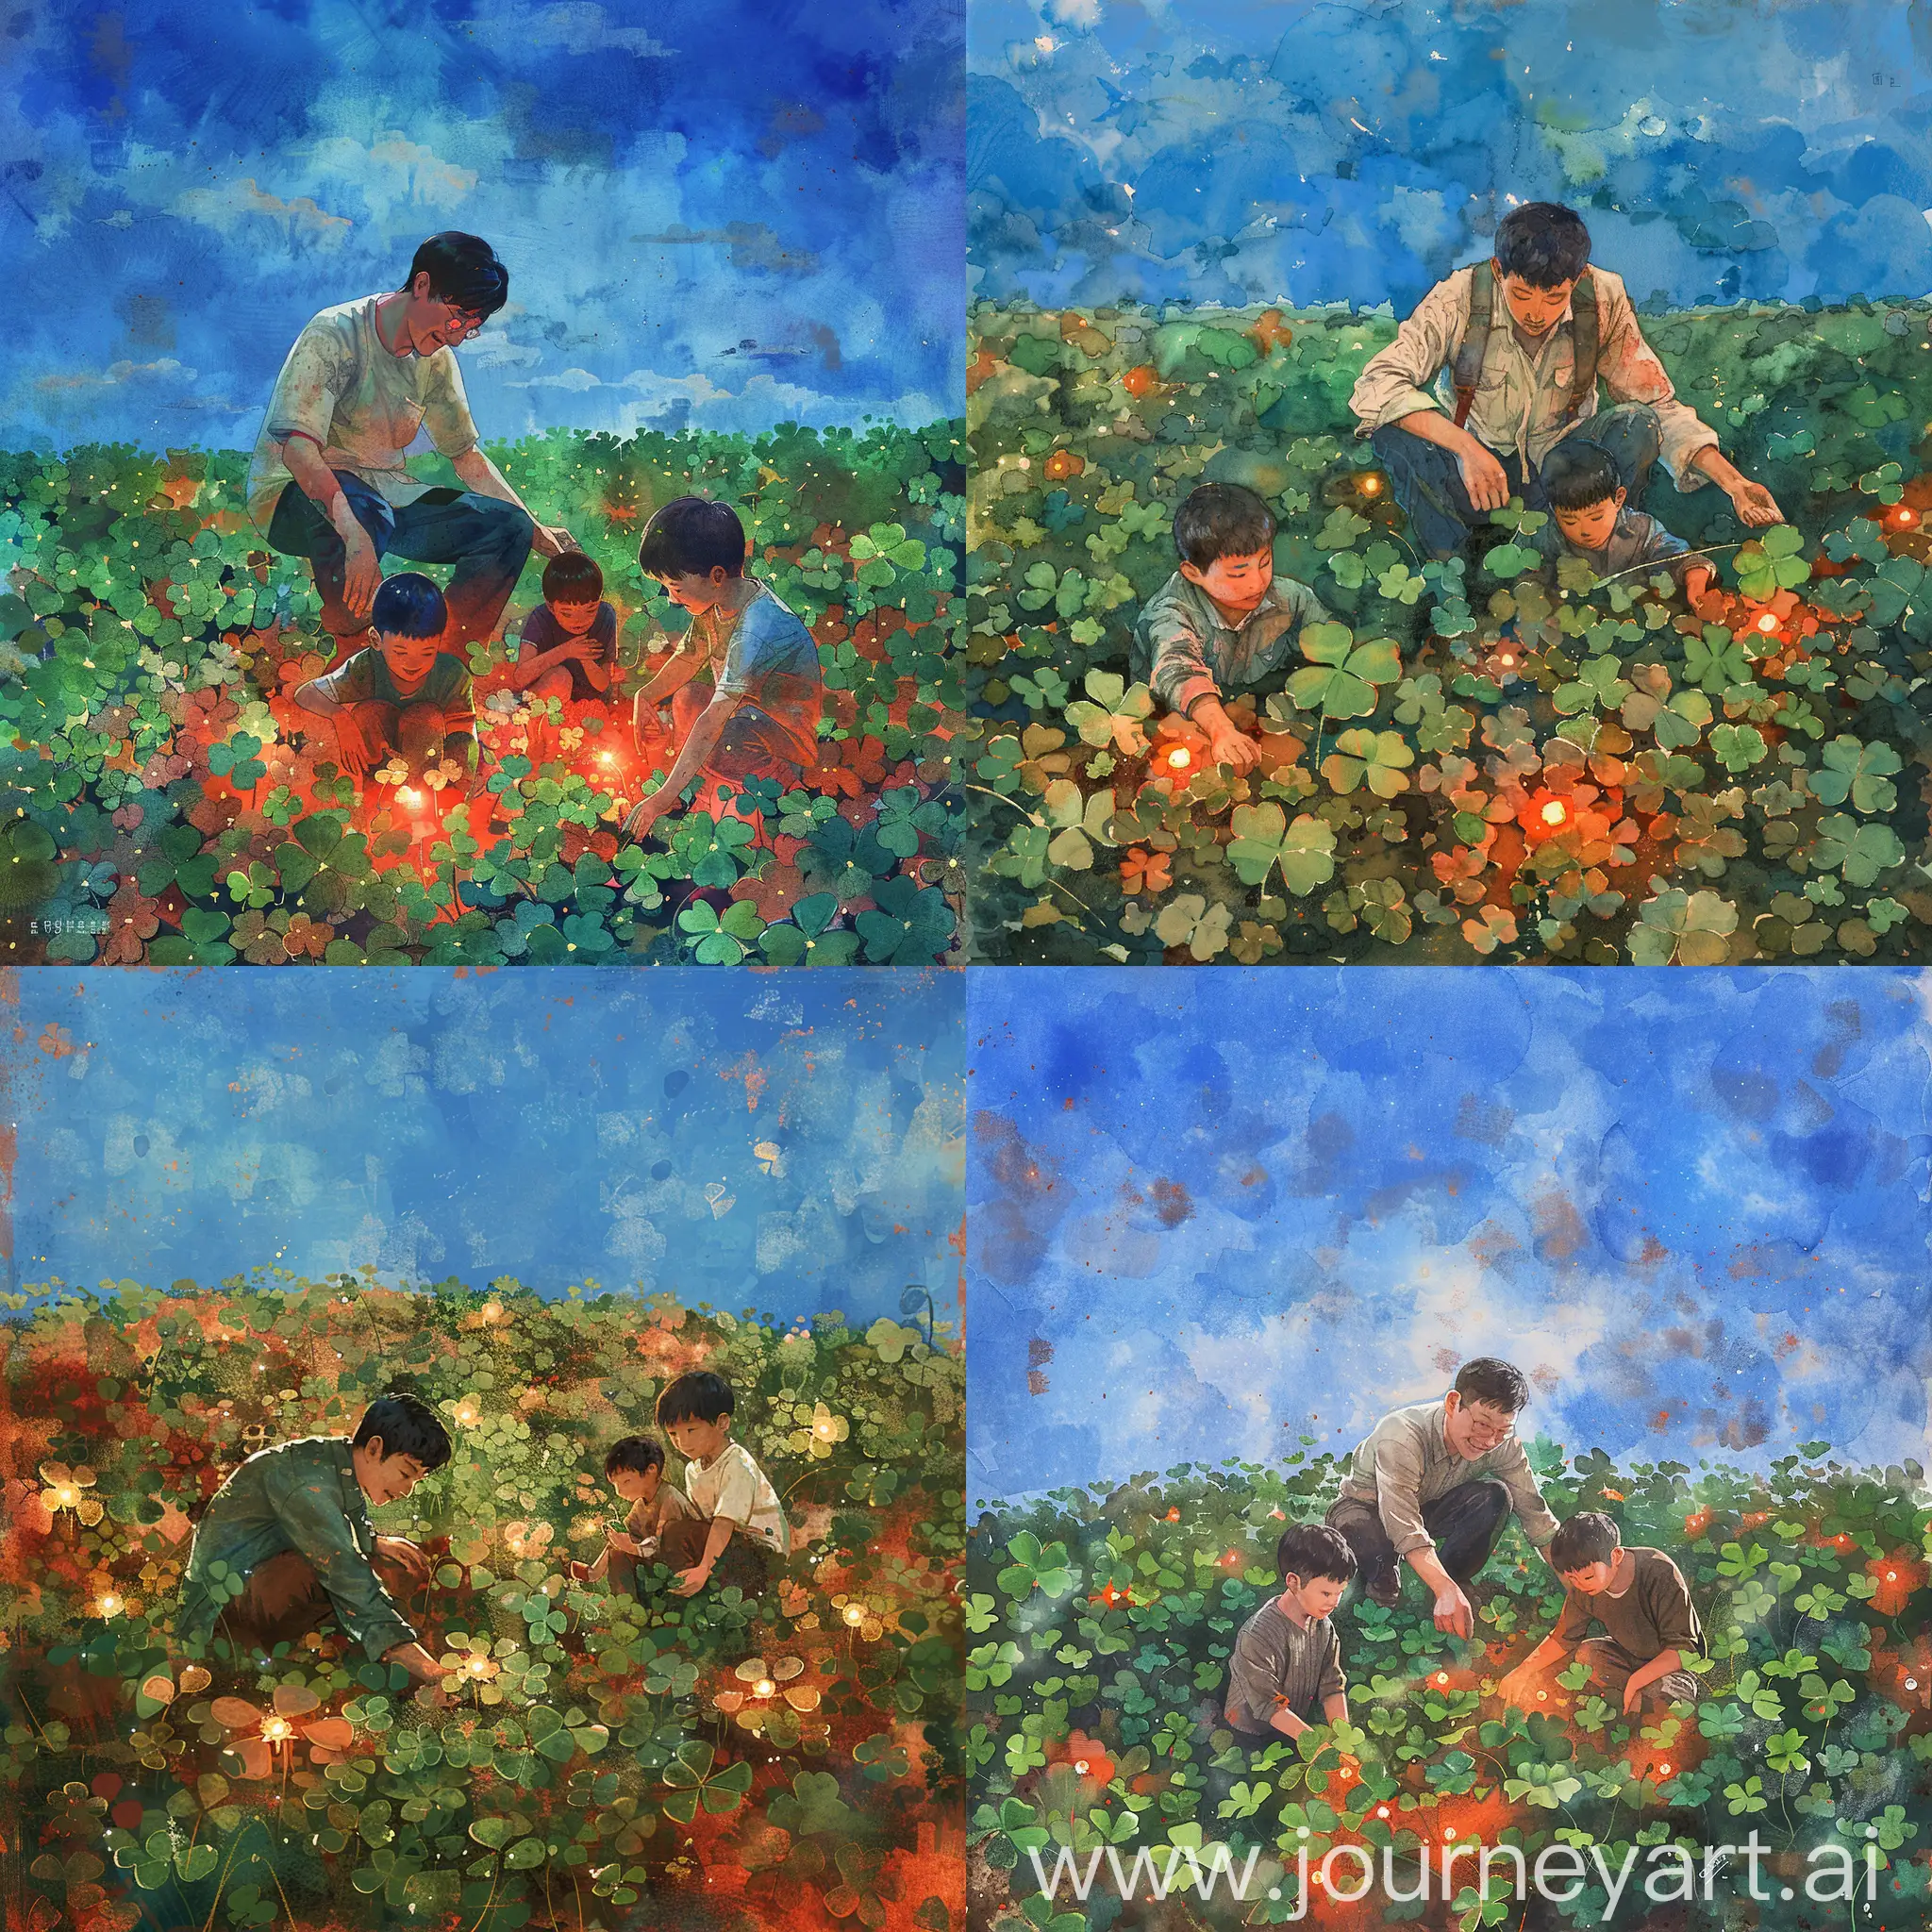 fantasy exploration, 1 adult Korean male explorer, 2 boys, field full of clover flowers, ((number lamp lights on clover flowers)), sitting around, picking clover, adventure of fantasy characters, illustration, abstract, texture, watercolor, illustrator, hand drawn texture, different colors like reds, oranges, greens, browns, greys, white and black. This scene evokes an atmosphere that feels both dreamy and fantastical, with a blue sky, in the style of an impressionist painter. 